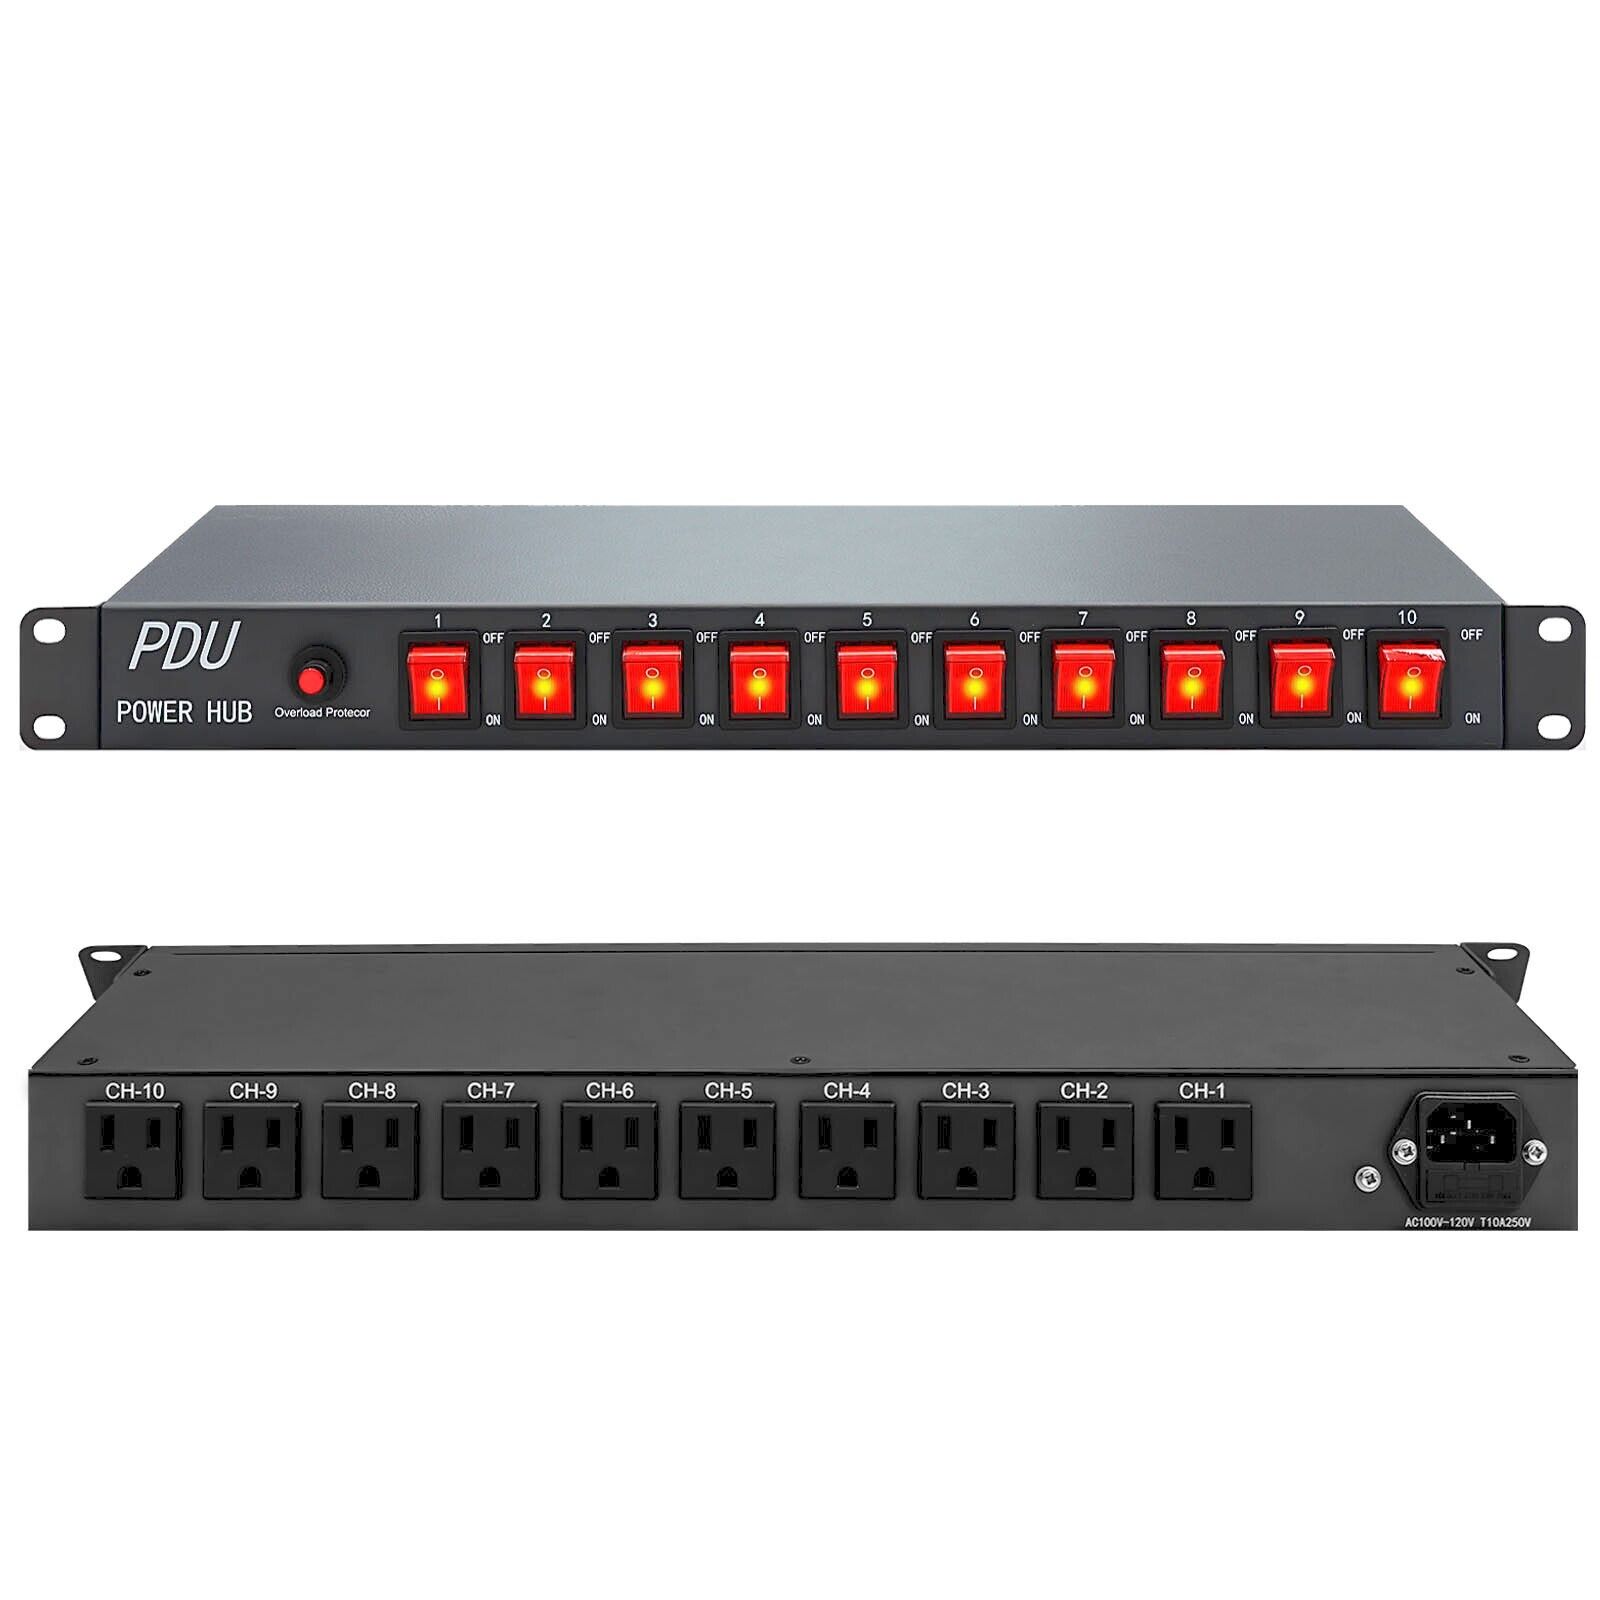 UltraPoE 1U Rack PDU Power Strip 15 A 10 Outlet Surge Protector，10 Front Switch